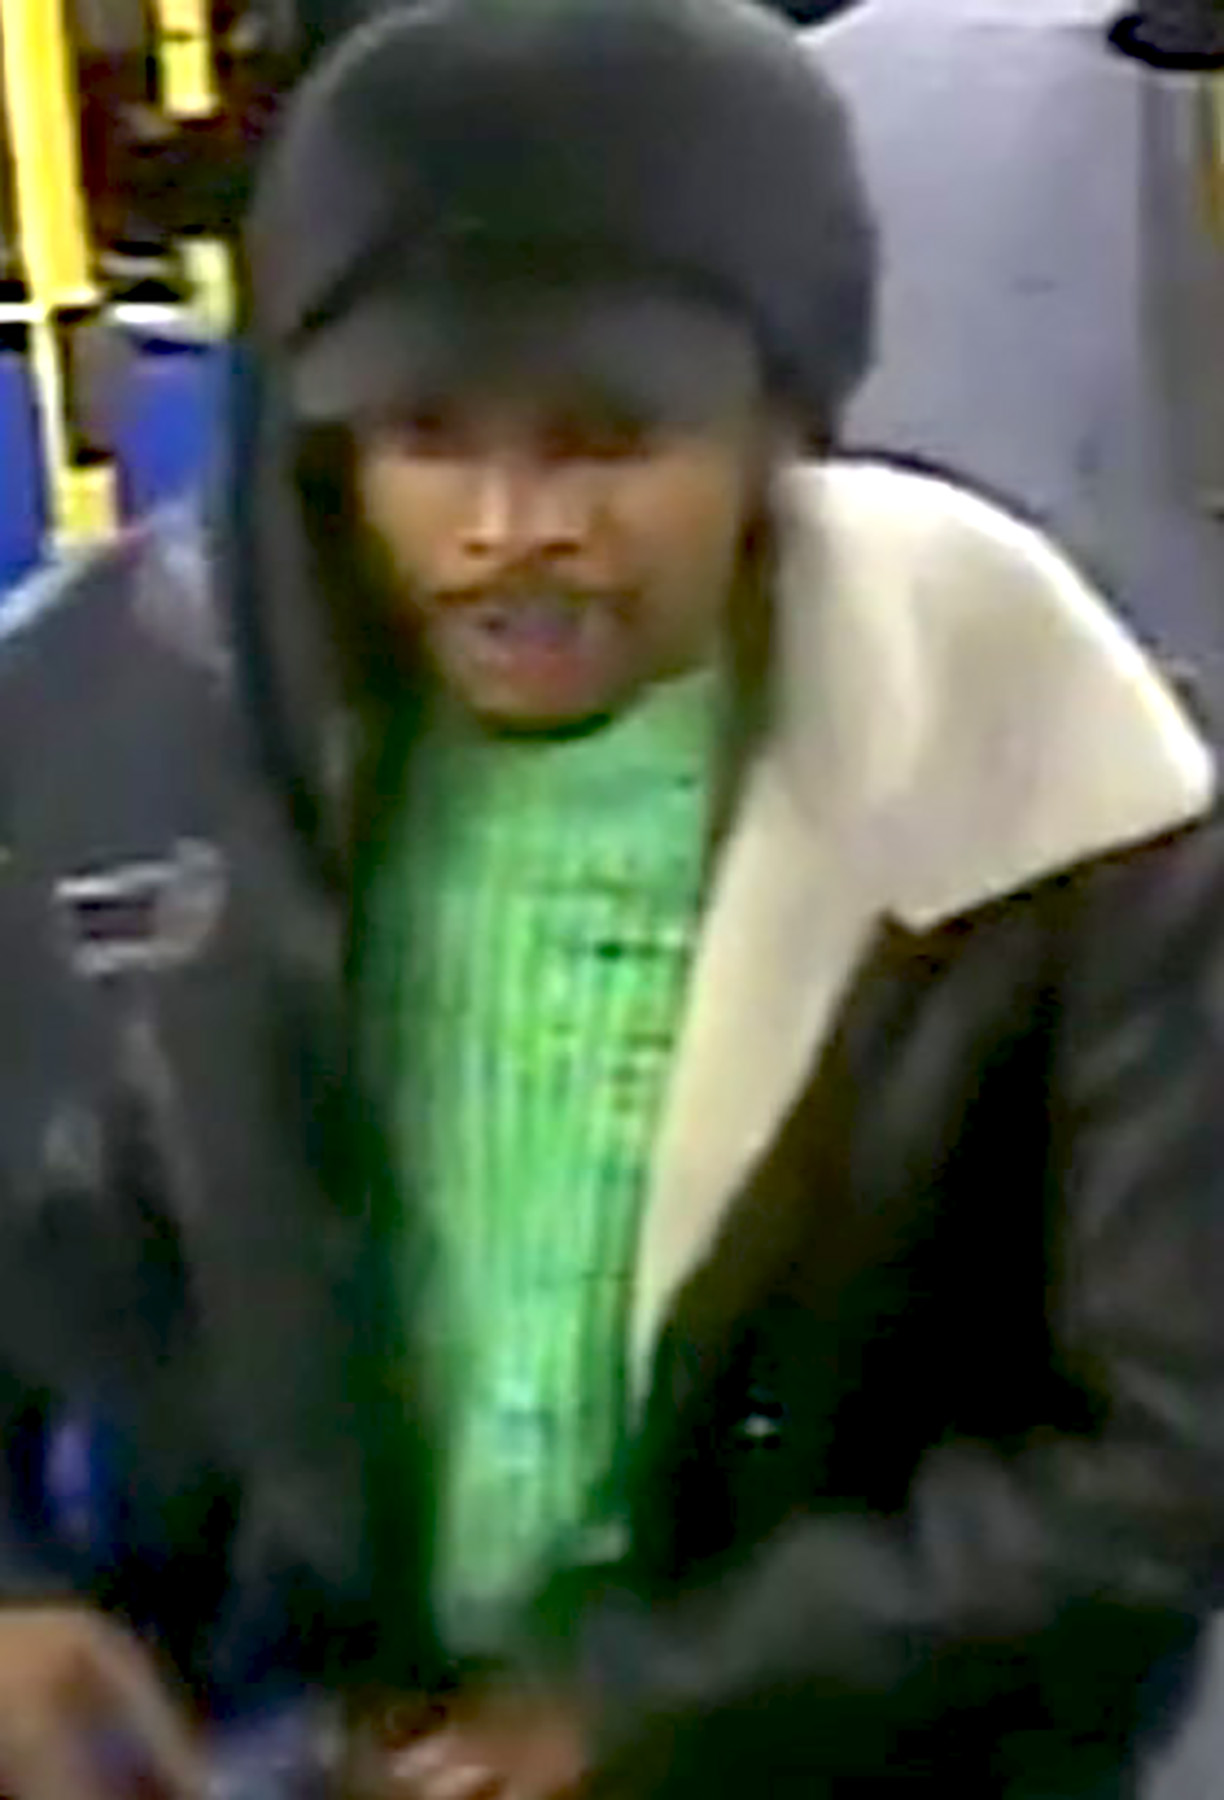 The NYPD is searching for this man in connection with an unprovoked attack on a rider on a Bronx bus. -Photo by NYPD